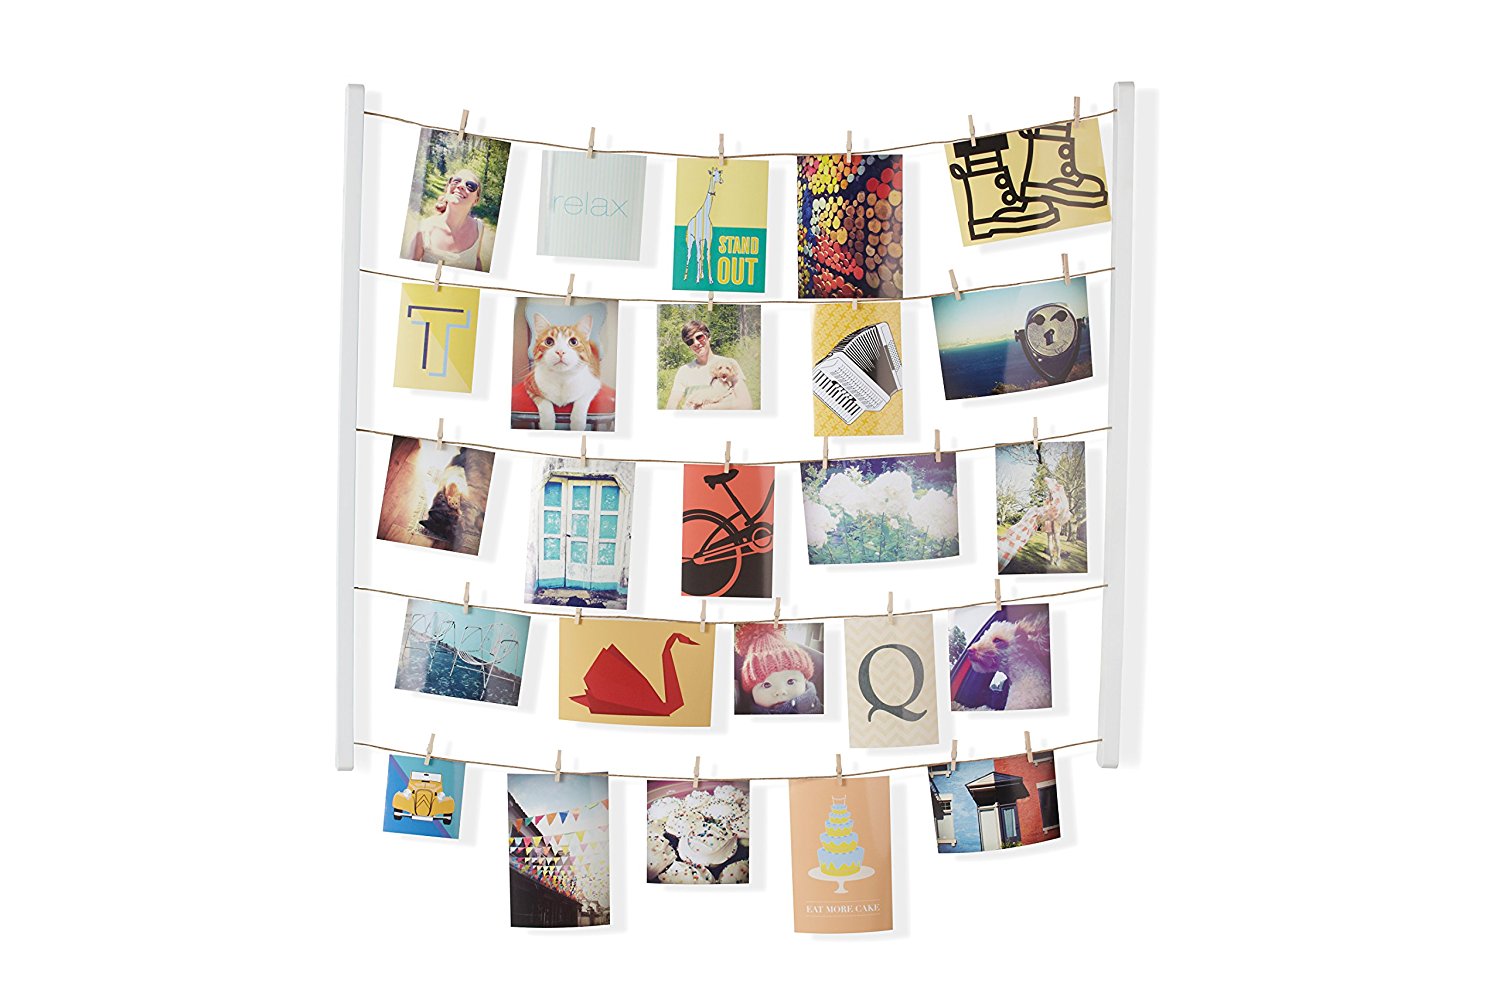 Umbra Hangit Photo Display - DIY Picture Frames Collage Set Includes Picture Hanging Wire Twine Cords, Natural Wood Wall Mounts and Clothespin Clips for Hanging Photos, Prints and Artwork (White)